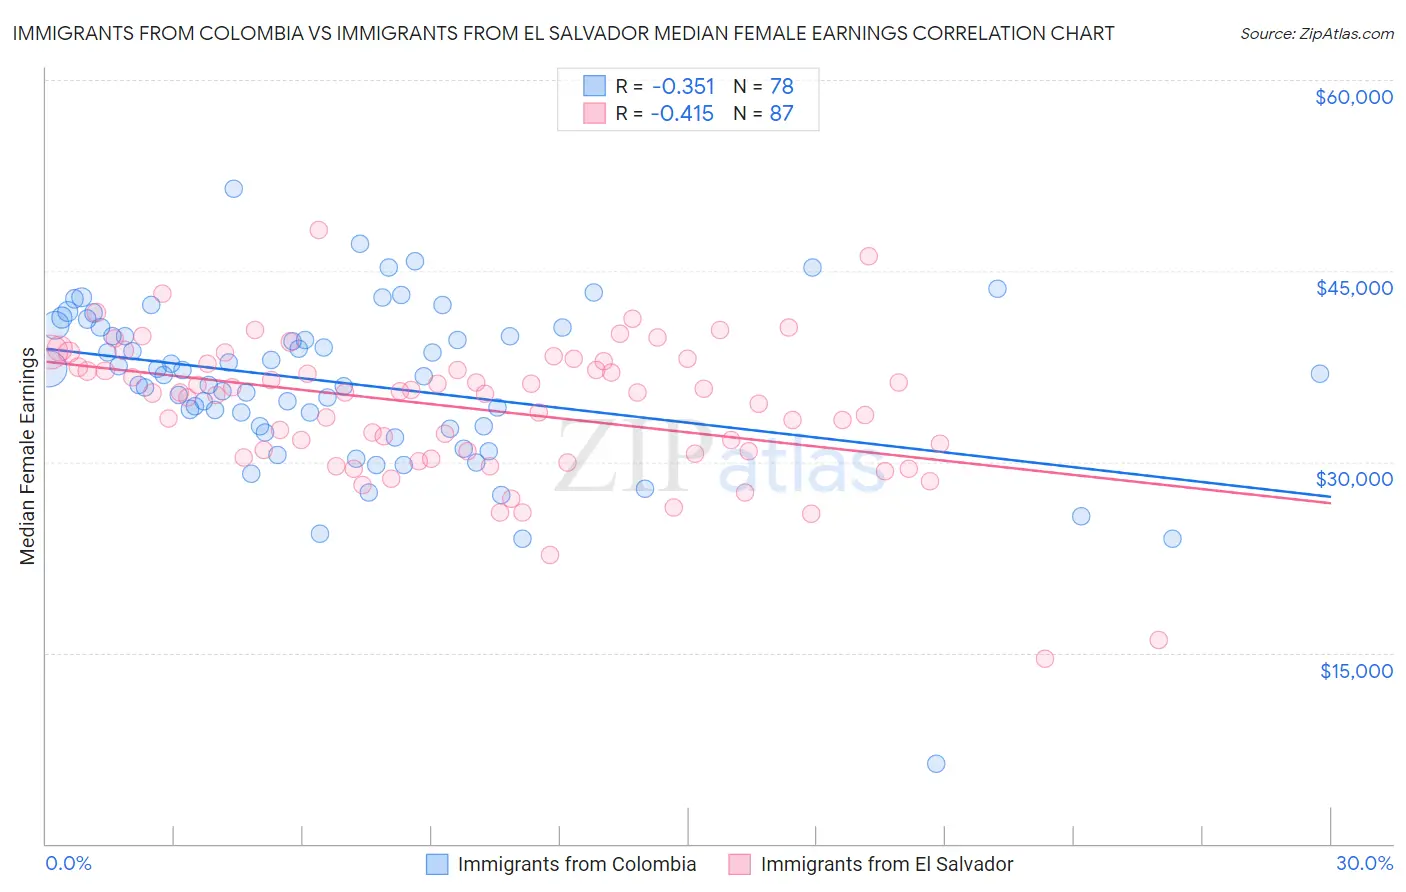 Immigrants from Colombia vs Immigrants from El Salvador Median Female Earnings